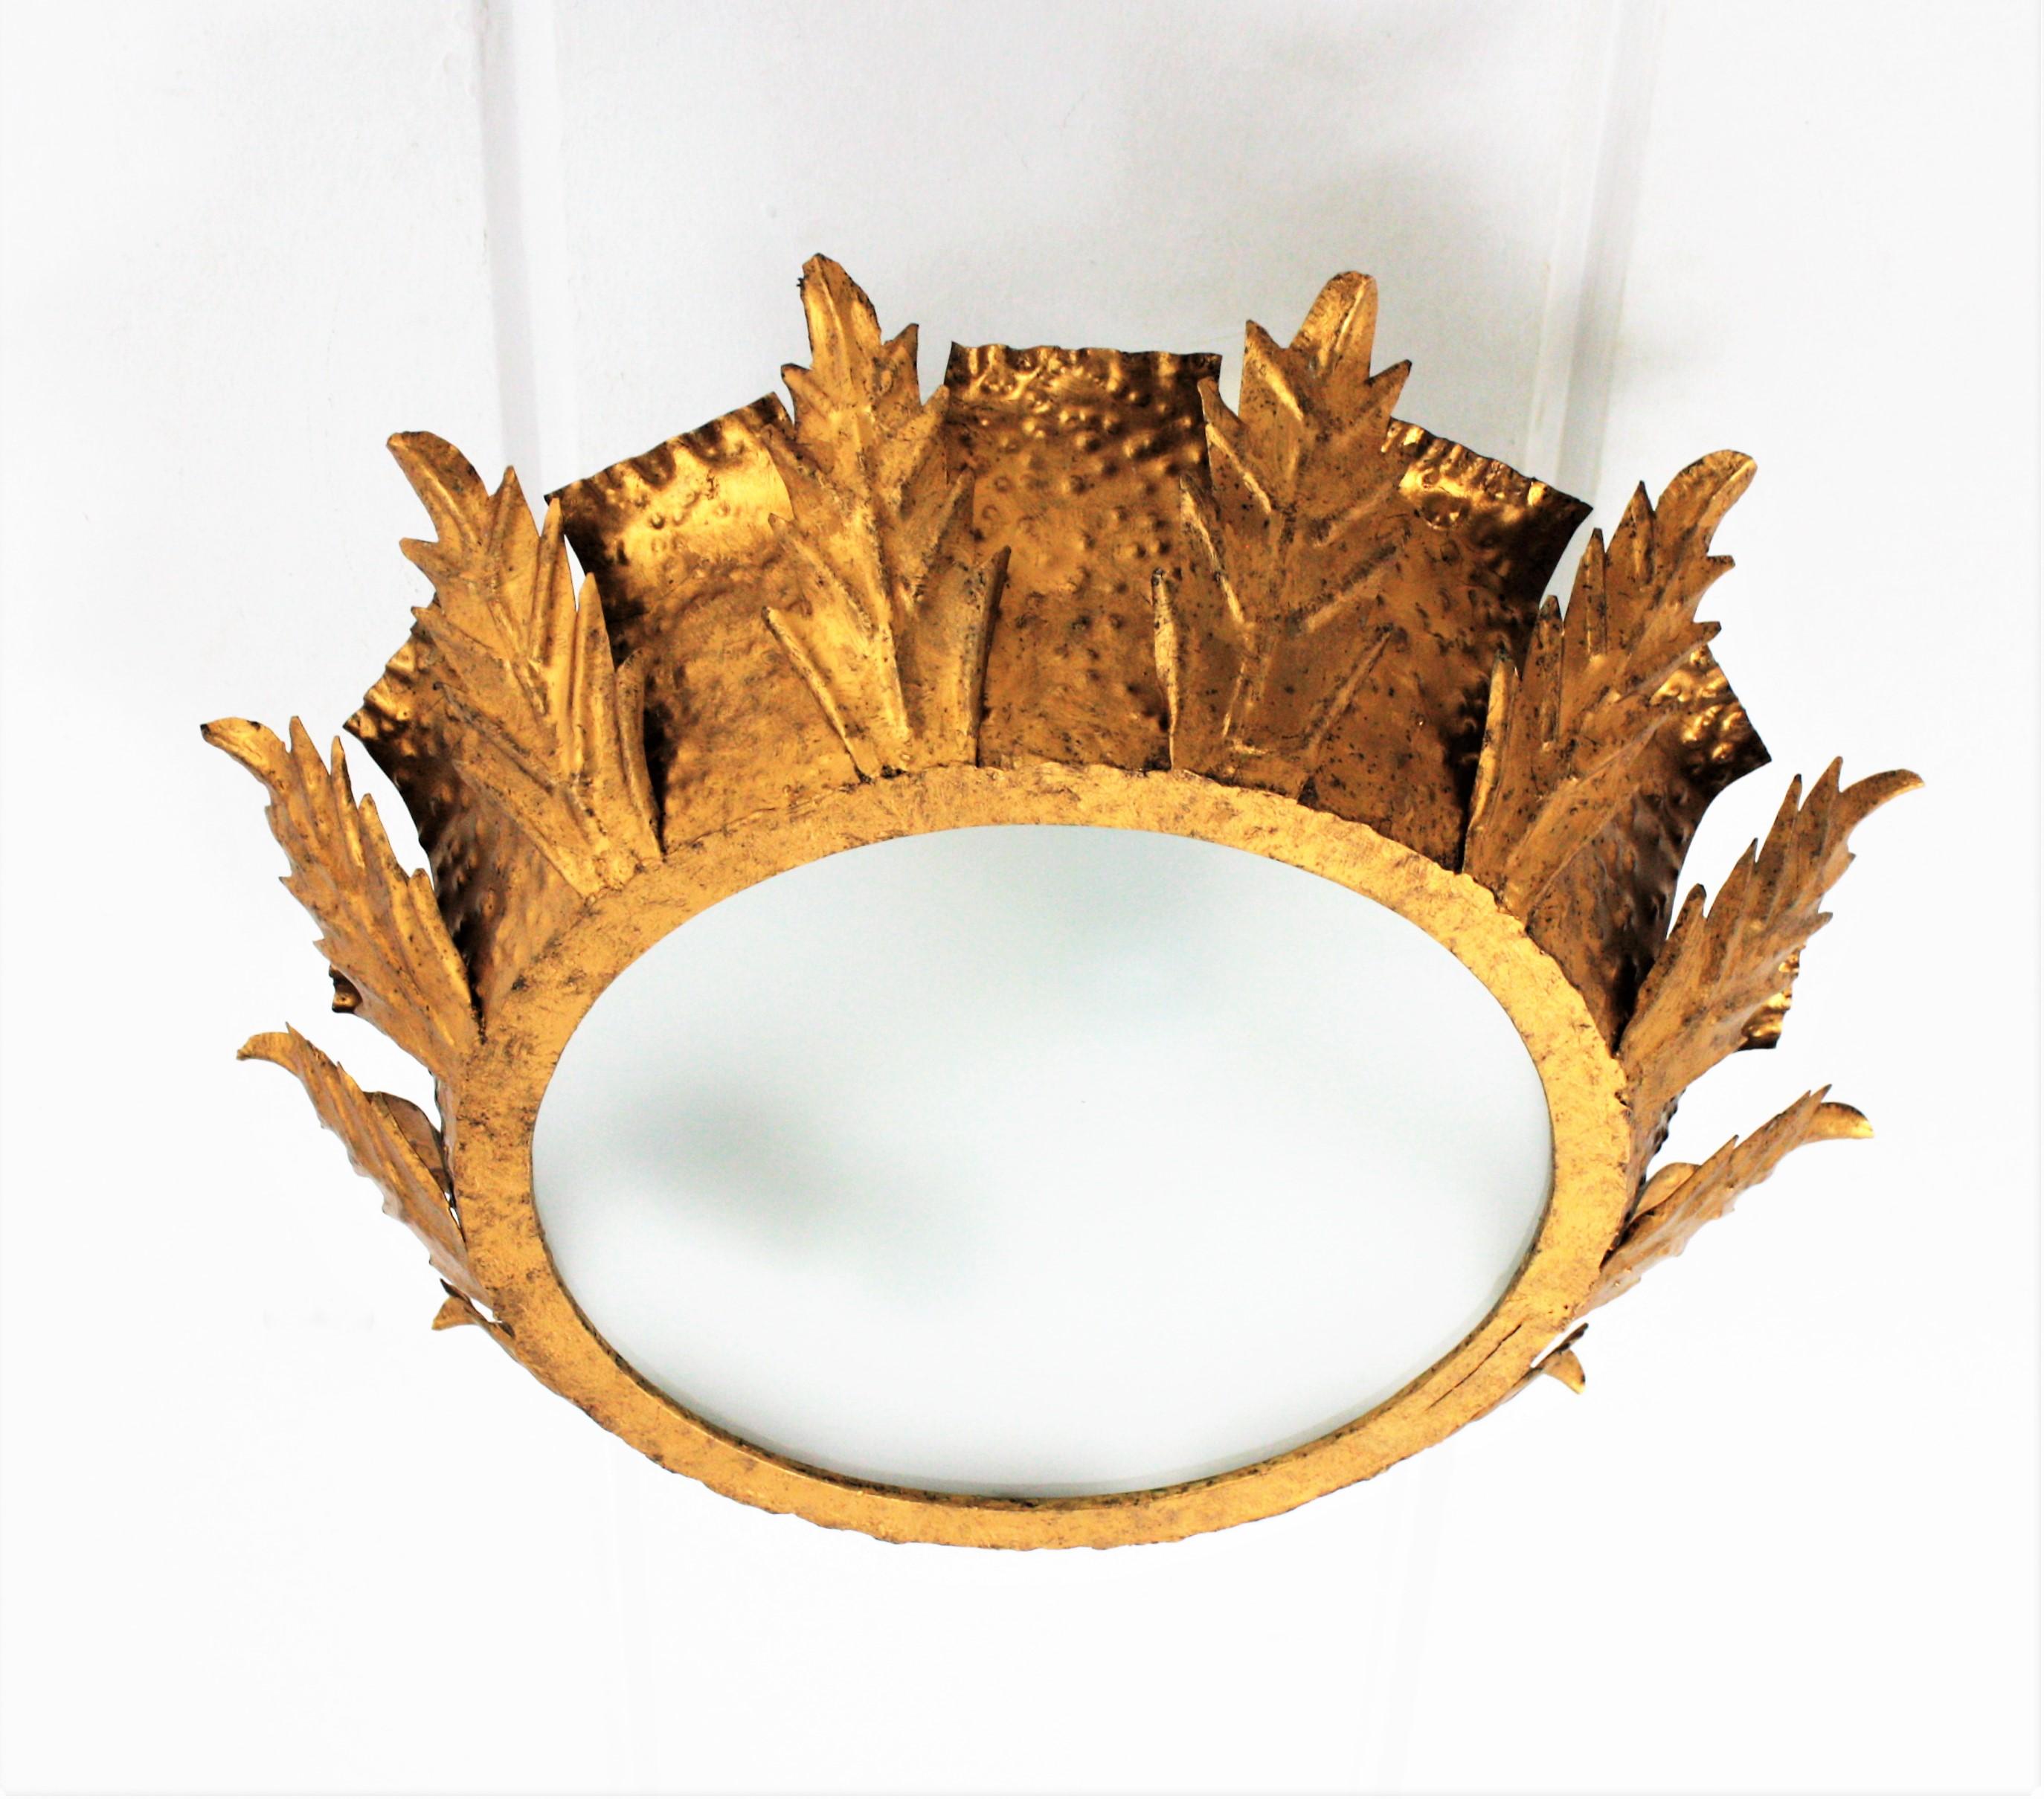 A hand-hammered medium sized sunburst crown shape leafed flush mount / pendant with frosted glass diffuser, Spain, 1950s.
The body of the light fixture is decorated by the hammer marks and hand-cut iron leaves. It has a nice gold leaf gilt aged